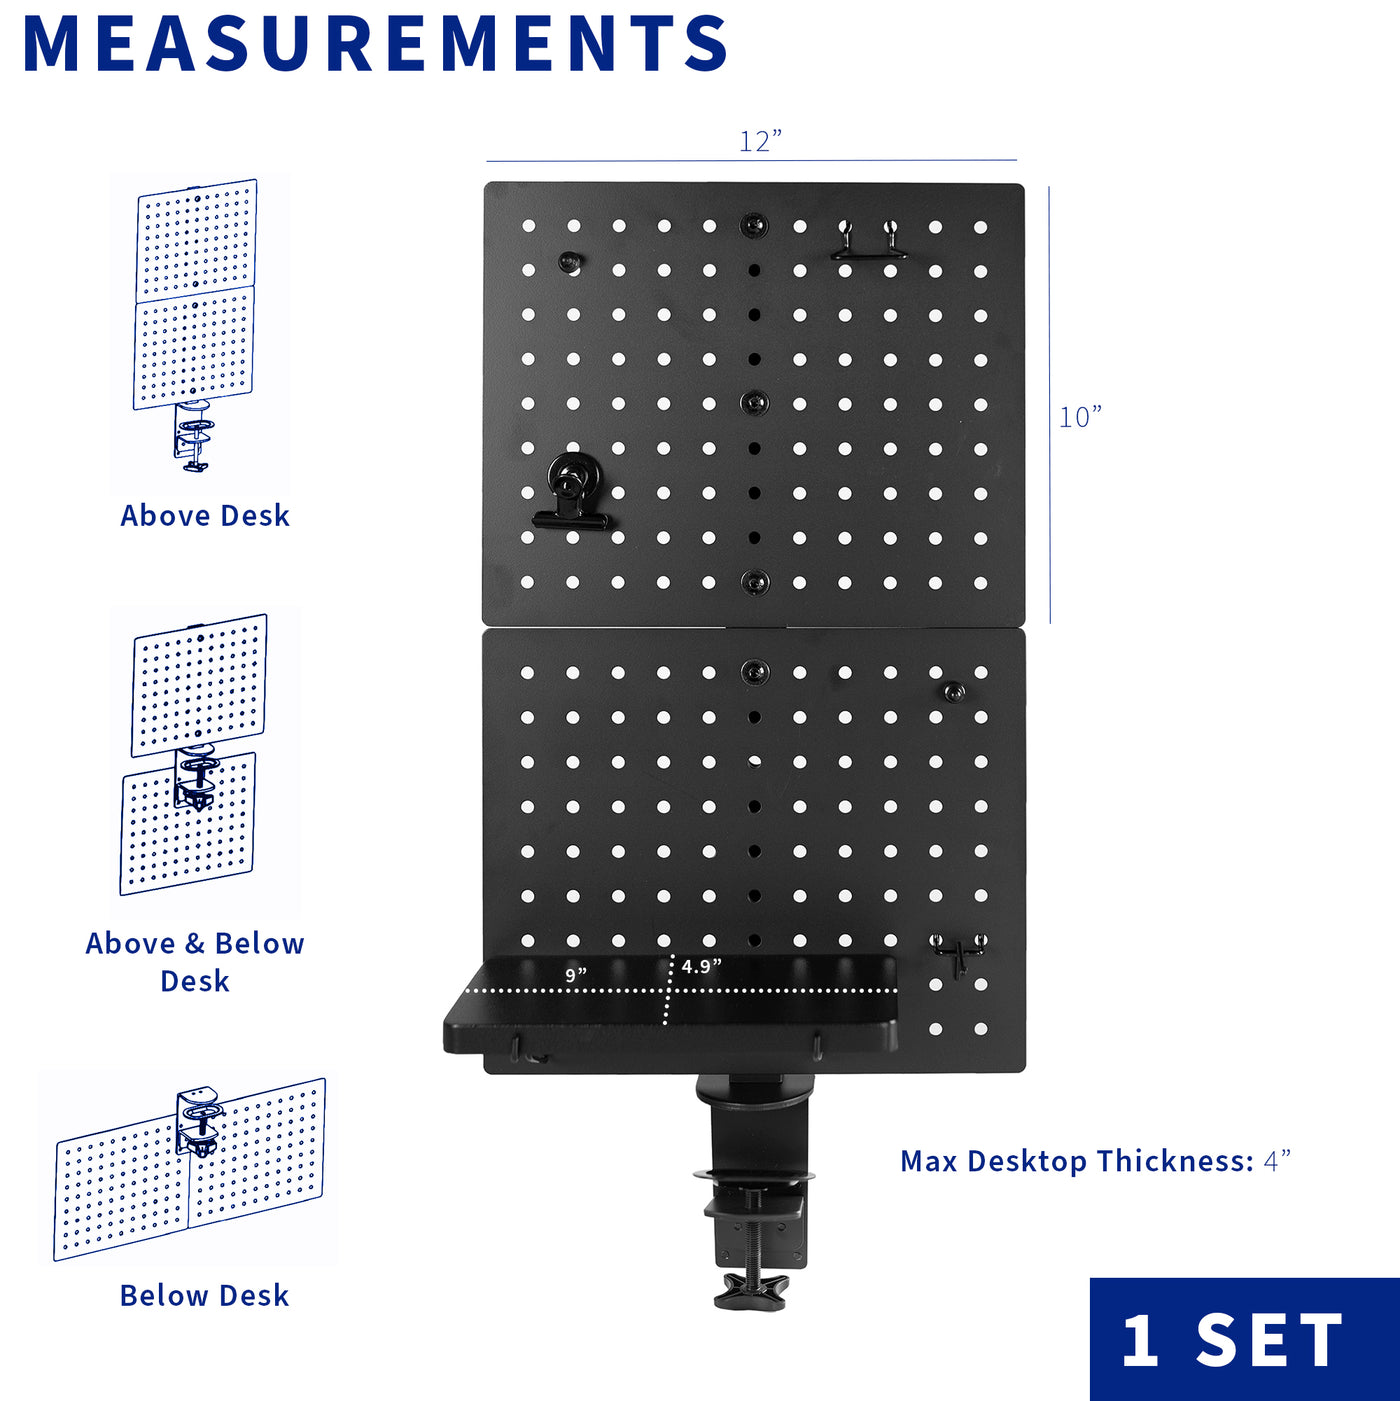 Measurements of above or below desk clamp on panel accessory.